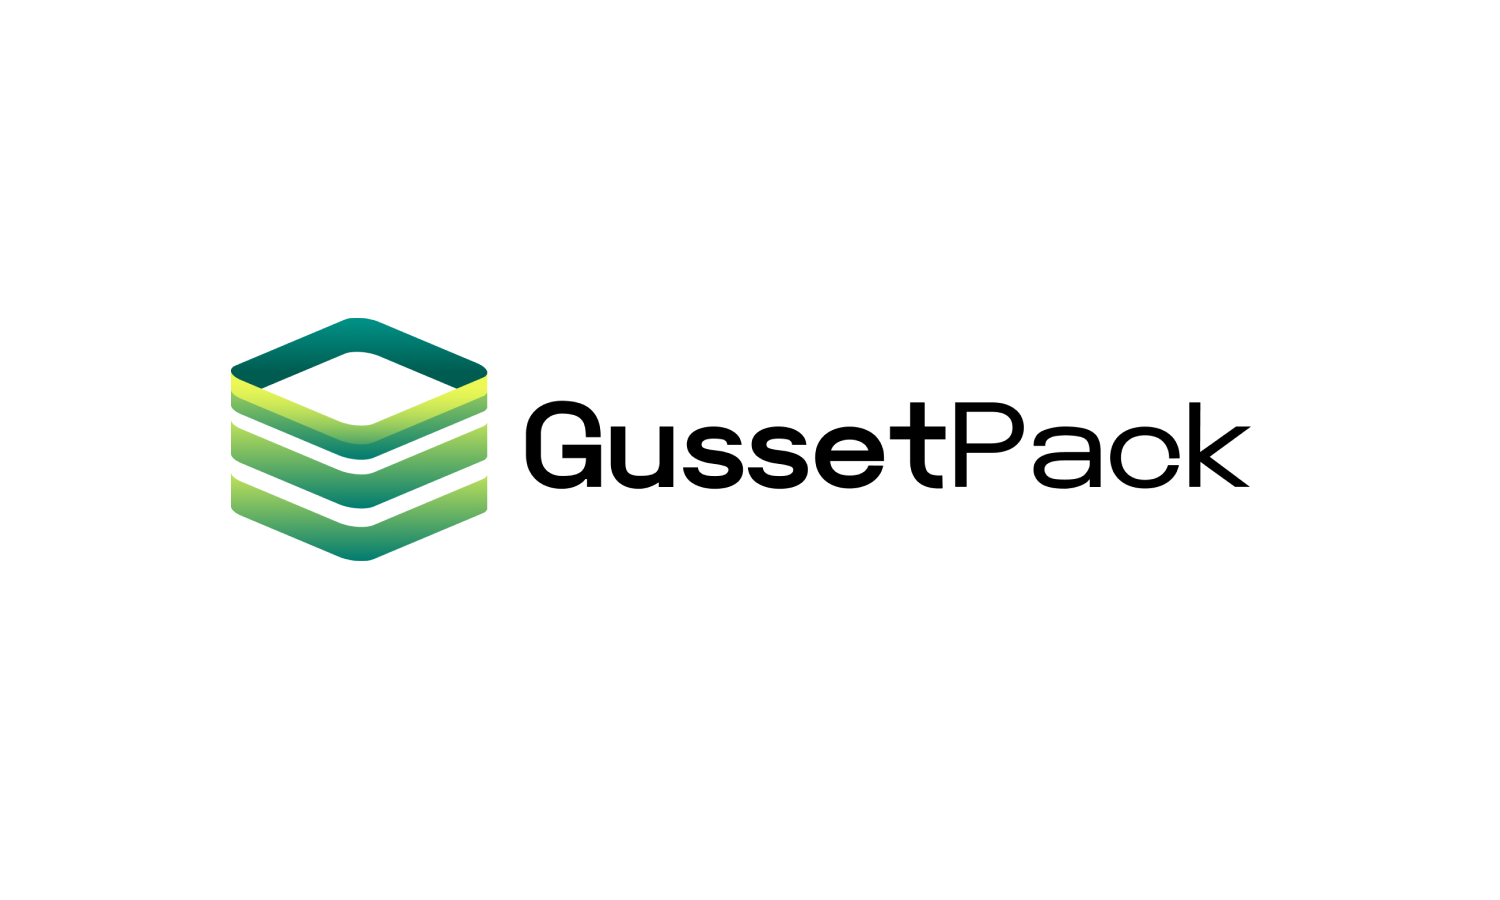 Gusset pack